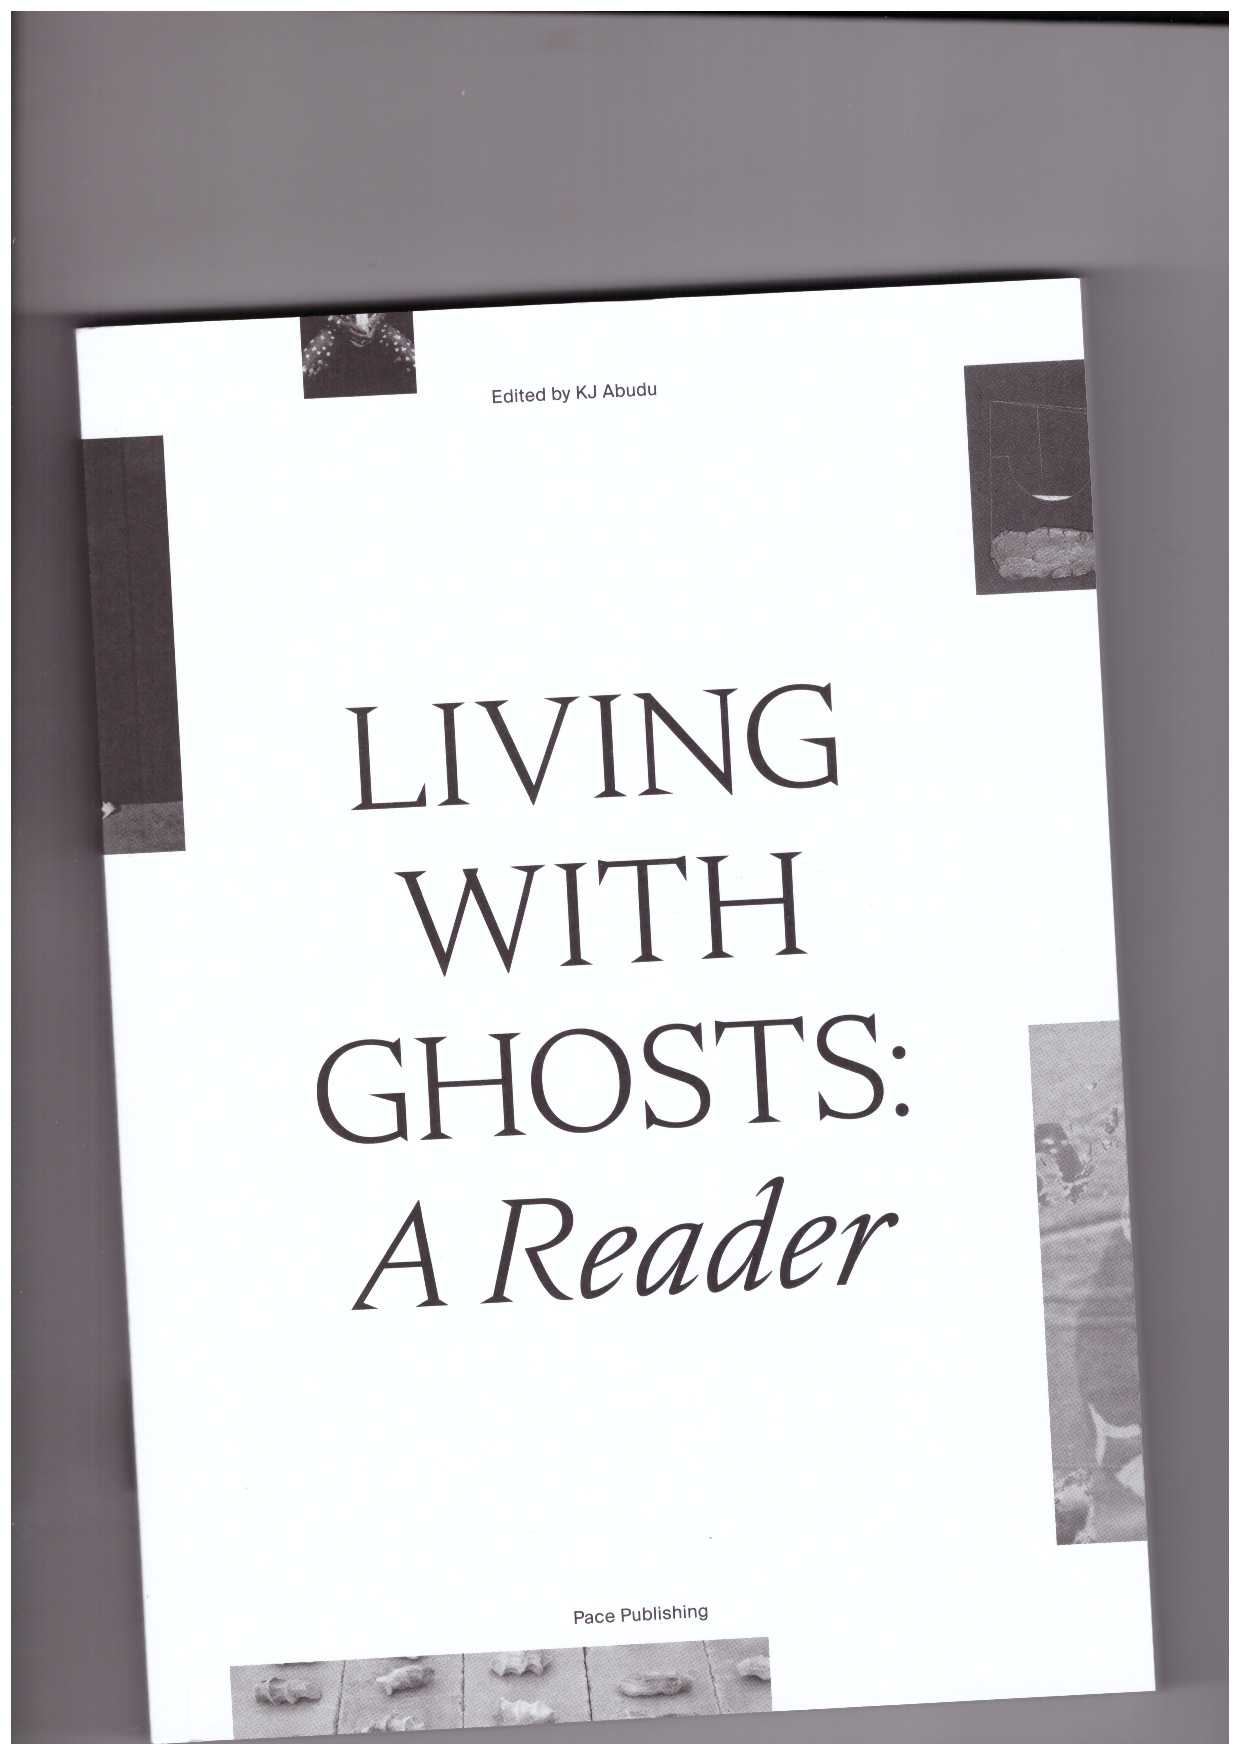 ABUDU, KJ (ed.) - Living with Ghosts: A Reader